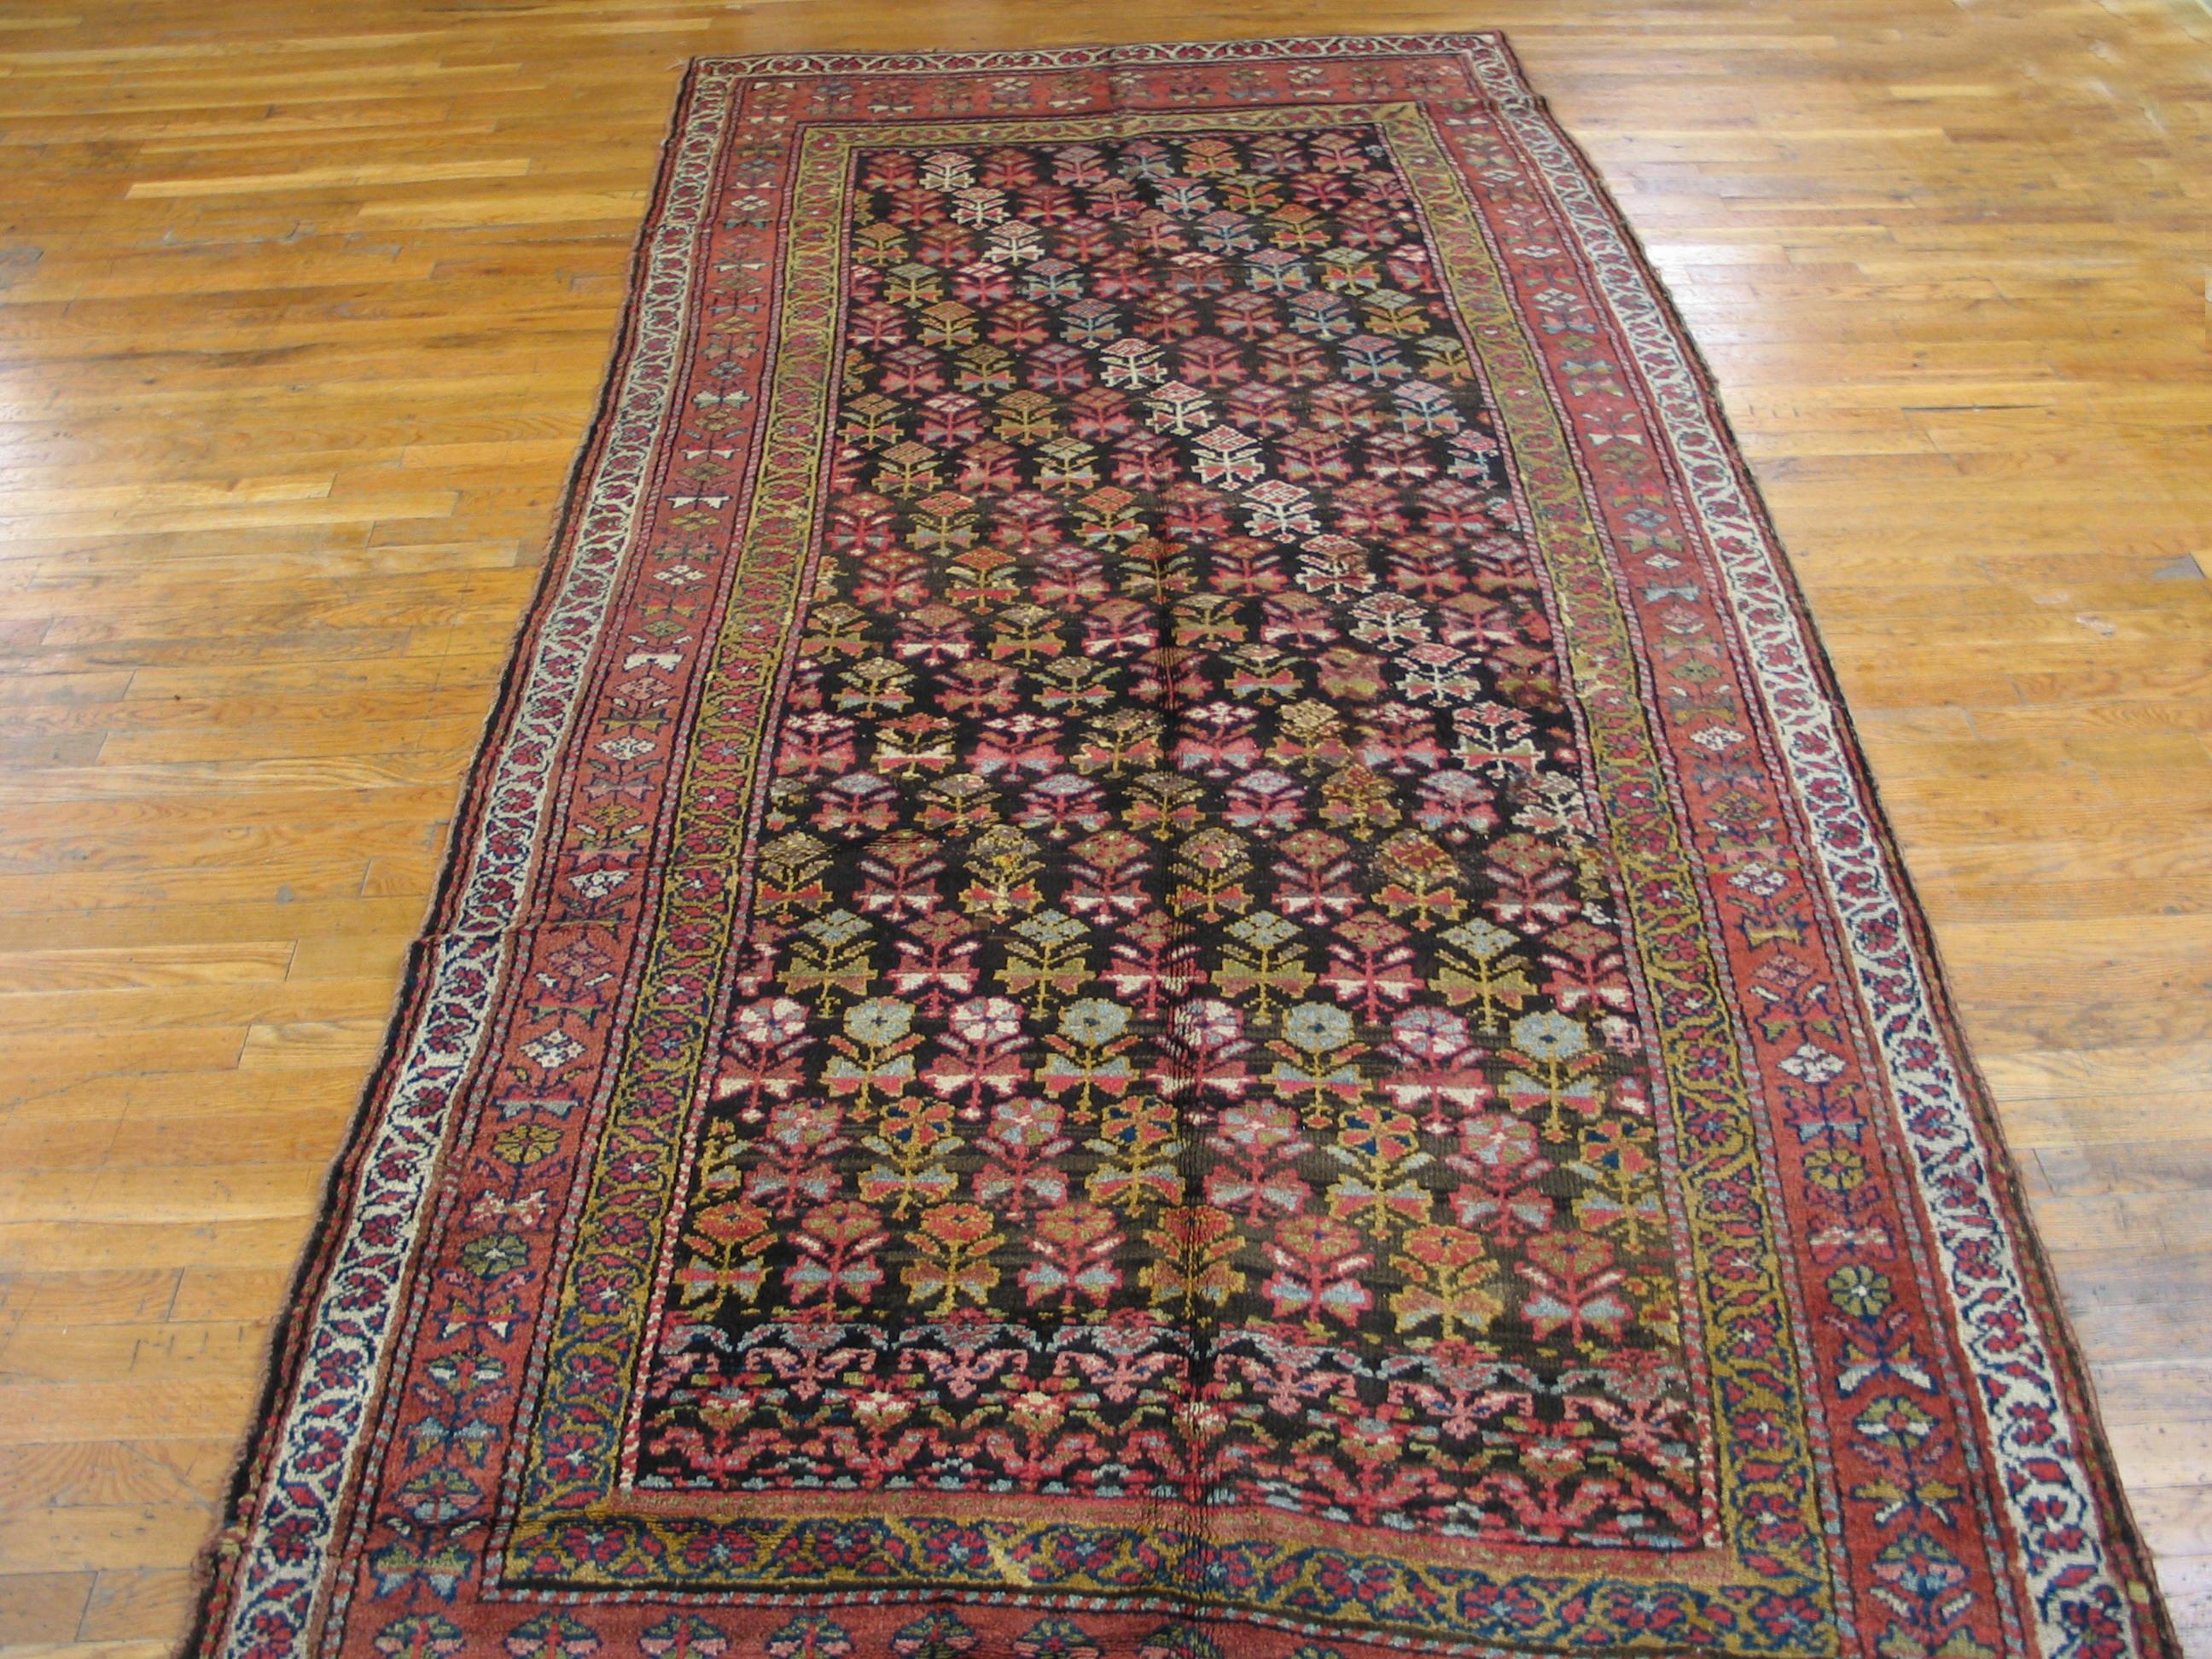 Hand-Knotted Early 20th Century Persian Kurdish Carpet ( 5' x 10'6